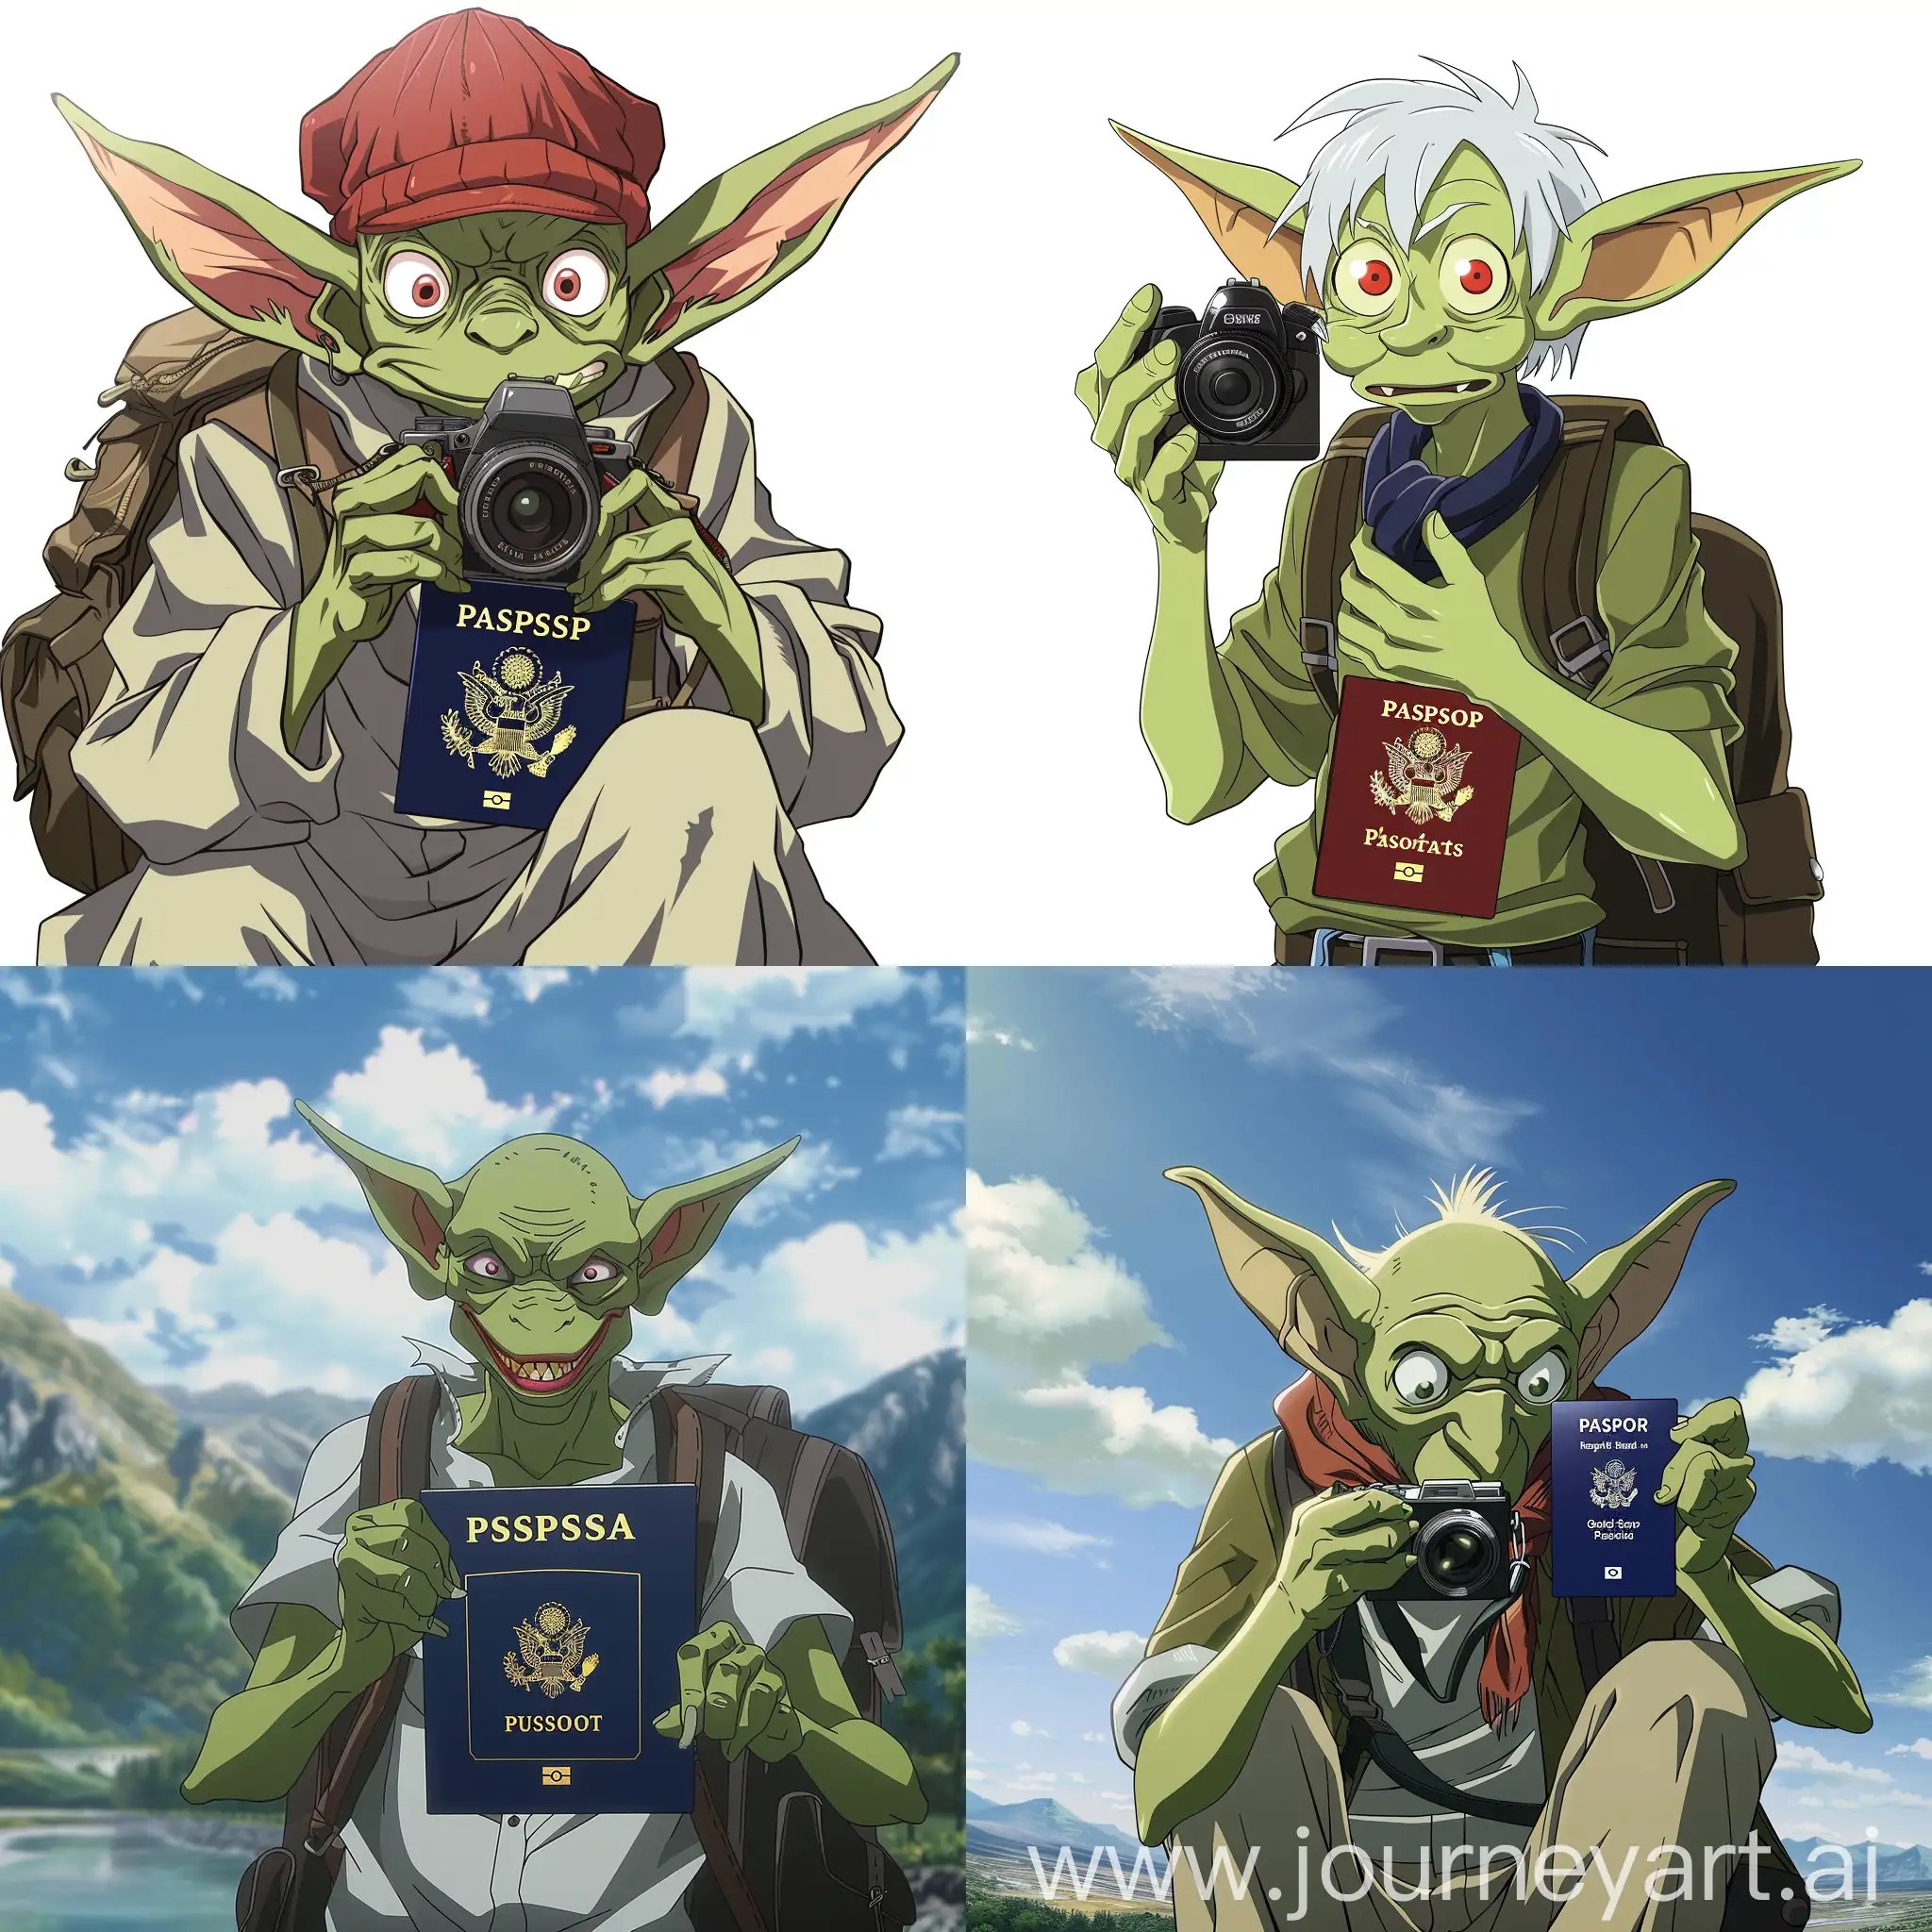 Anime-Goblin-Photographing-for-Passport-in-11-Aspect-Ratio